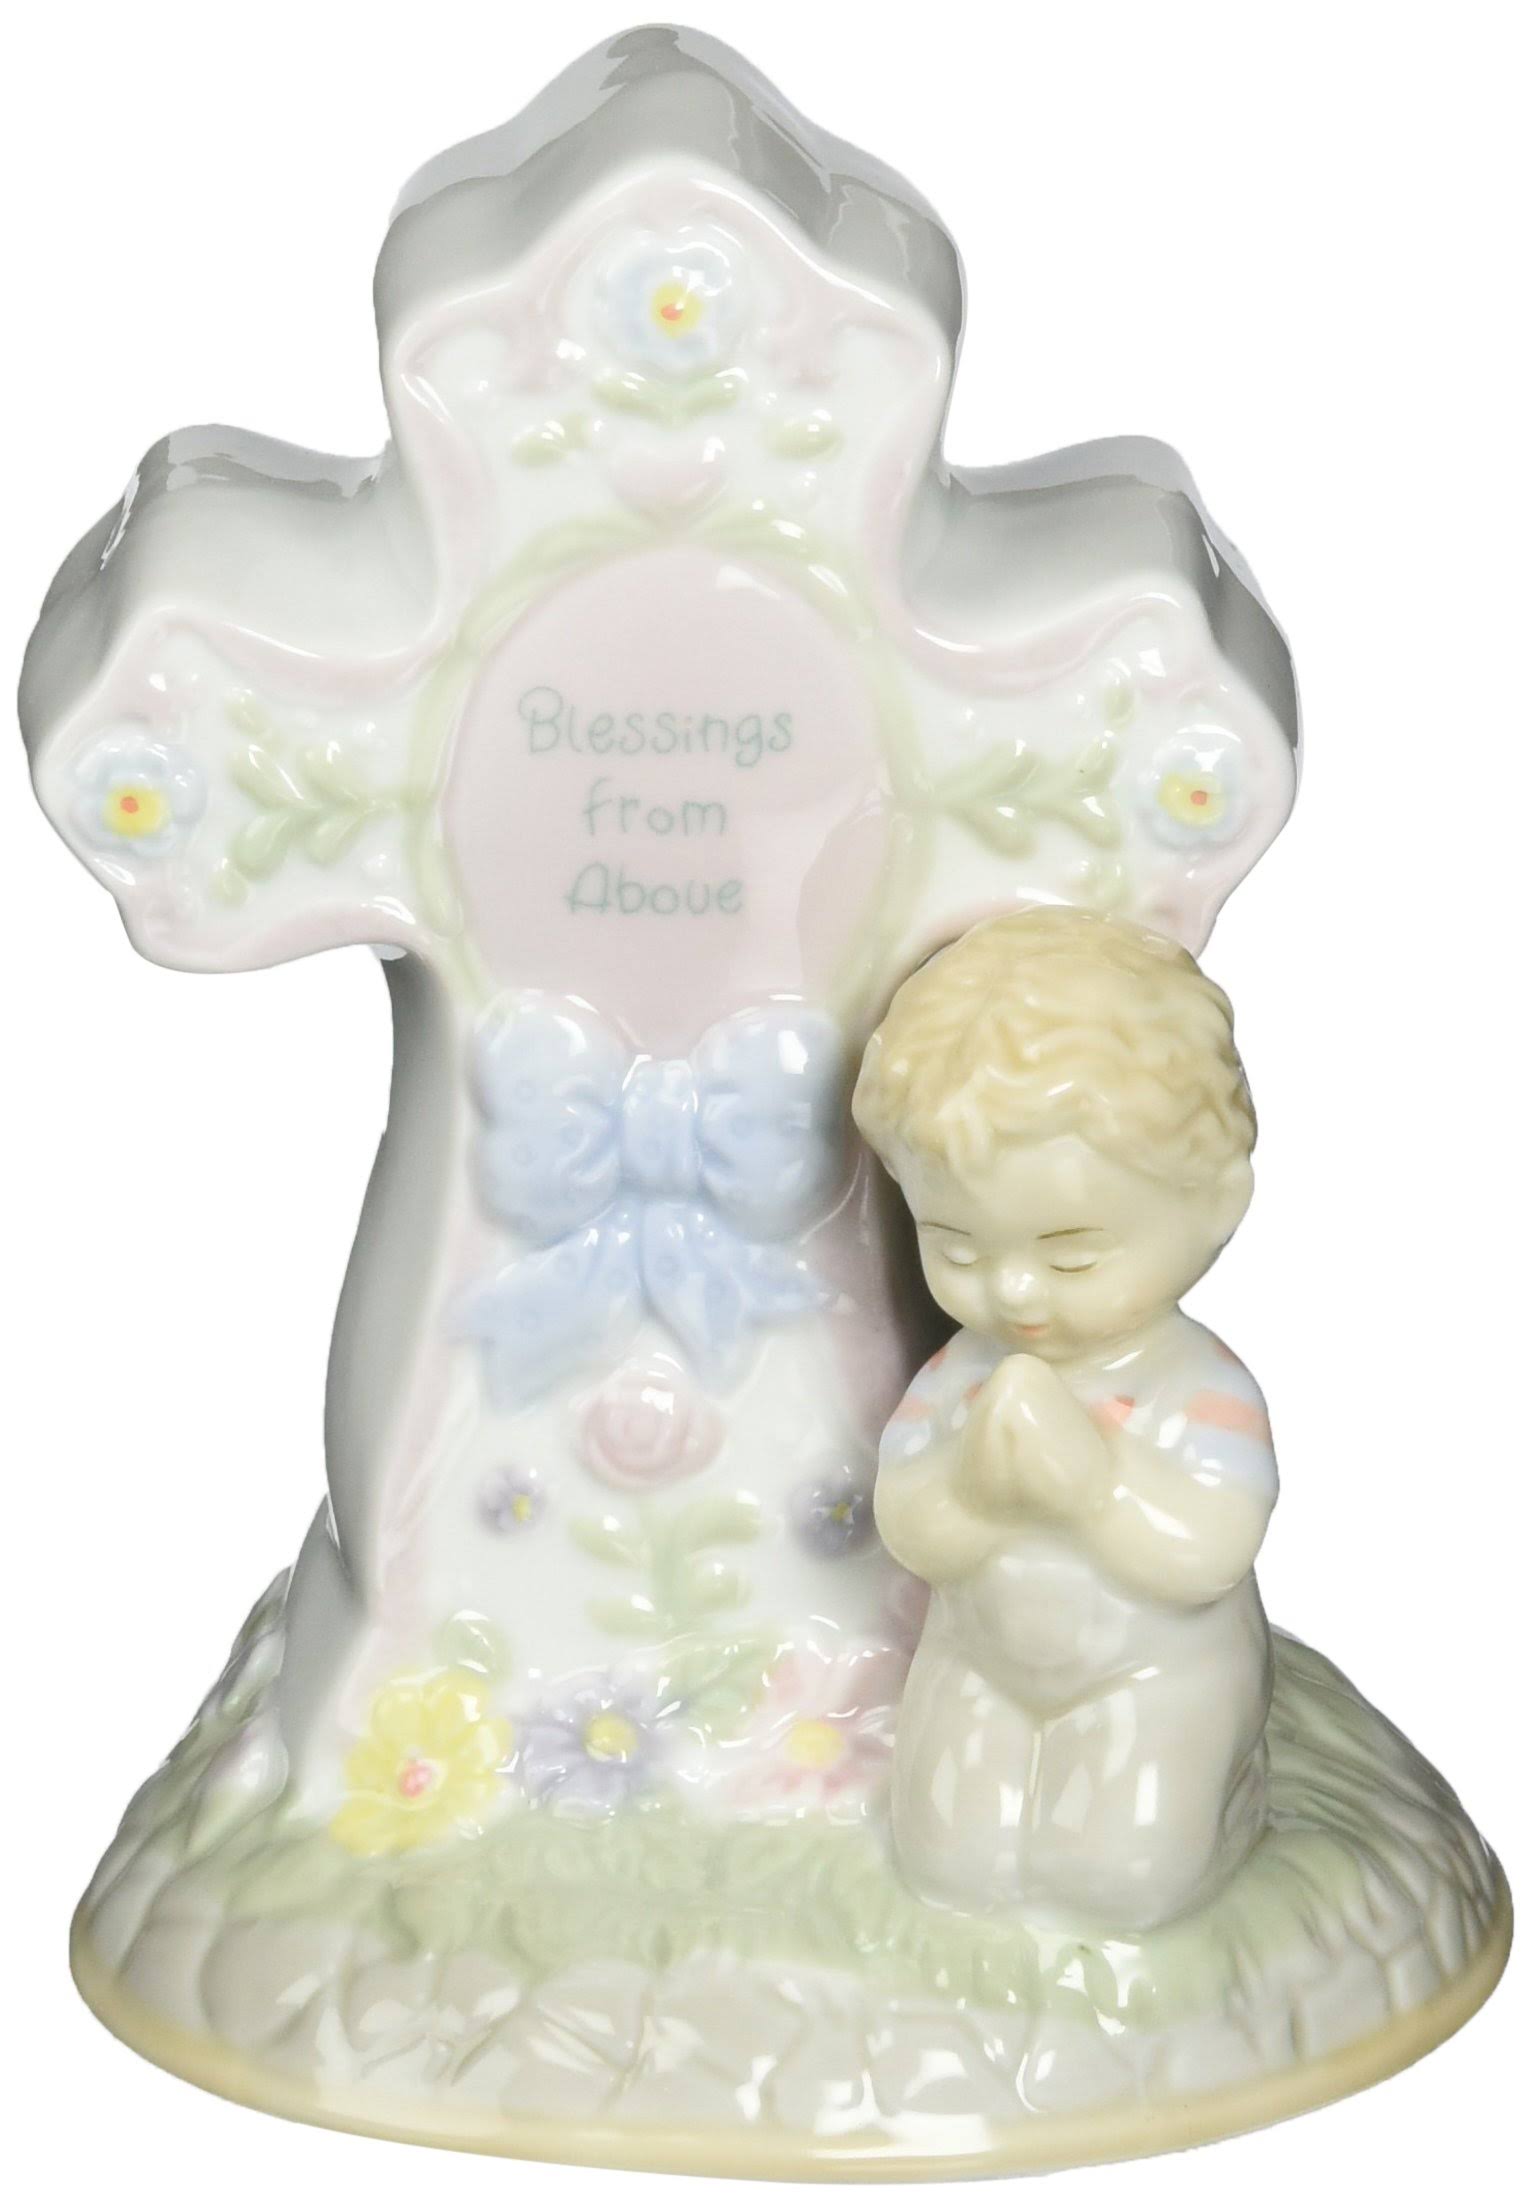 Cosmos Creations Collectible and Figurine Praying Boy Light-up Figurine One-Size